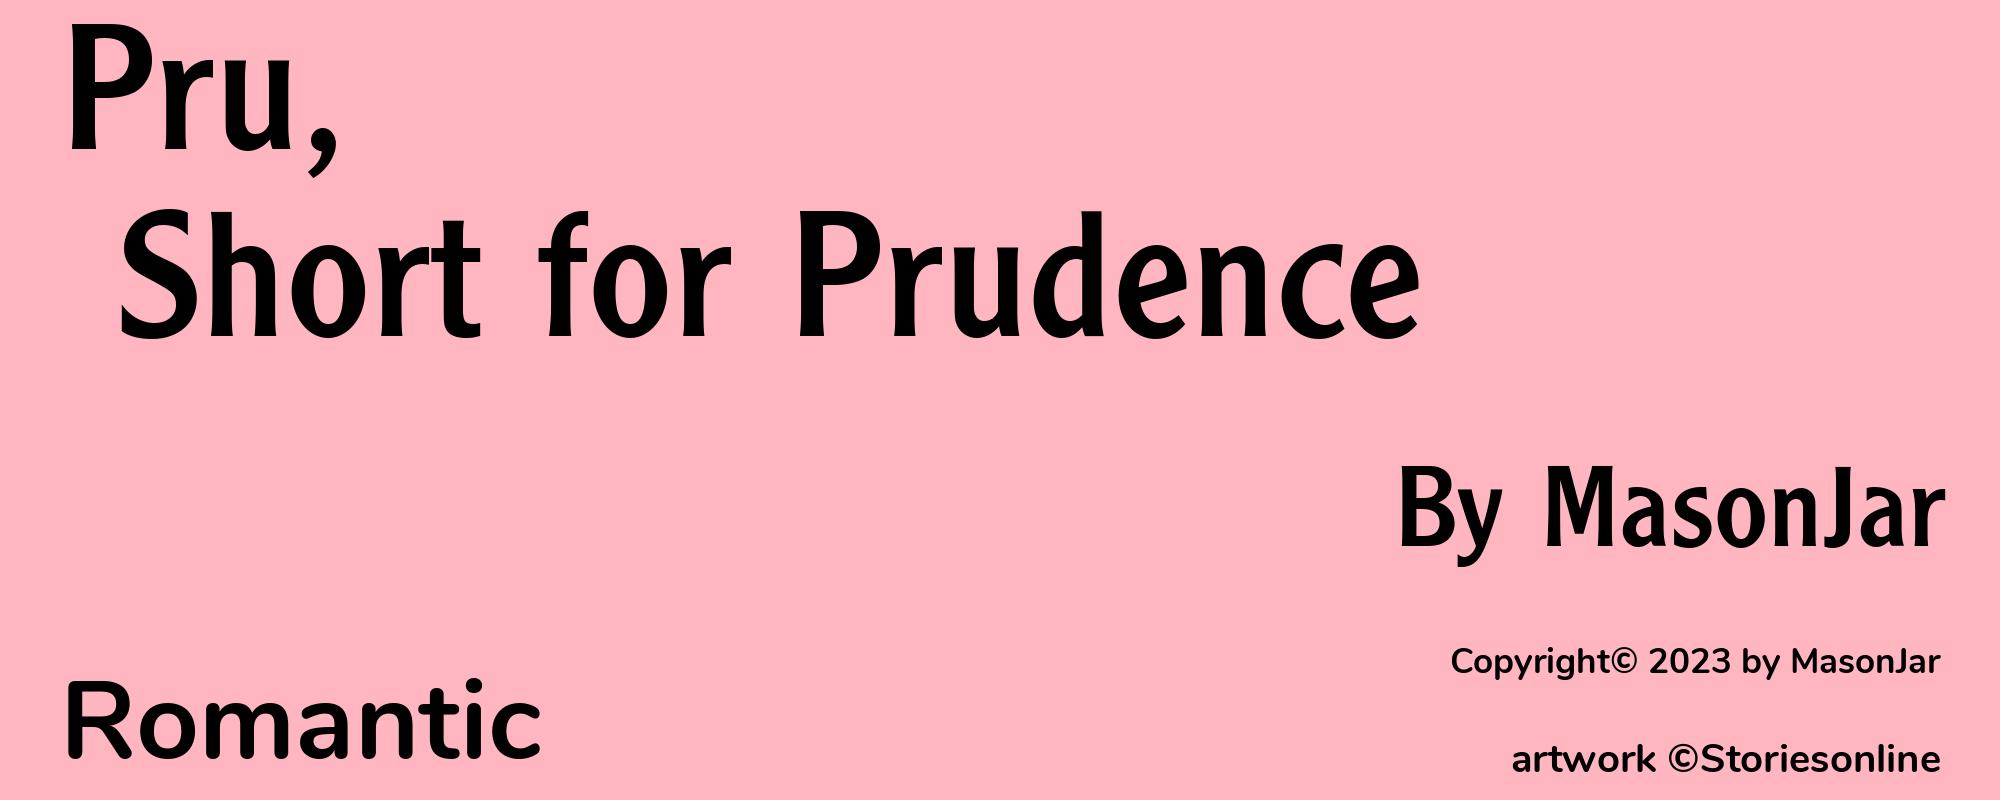 Pru, Short for Prudence - Cover